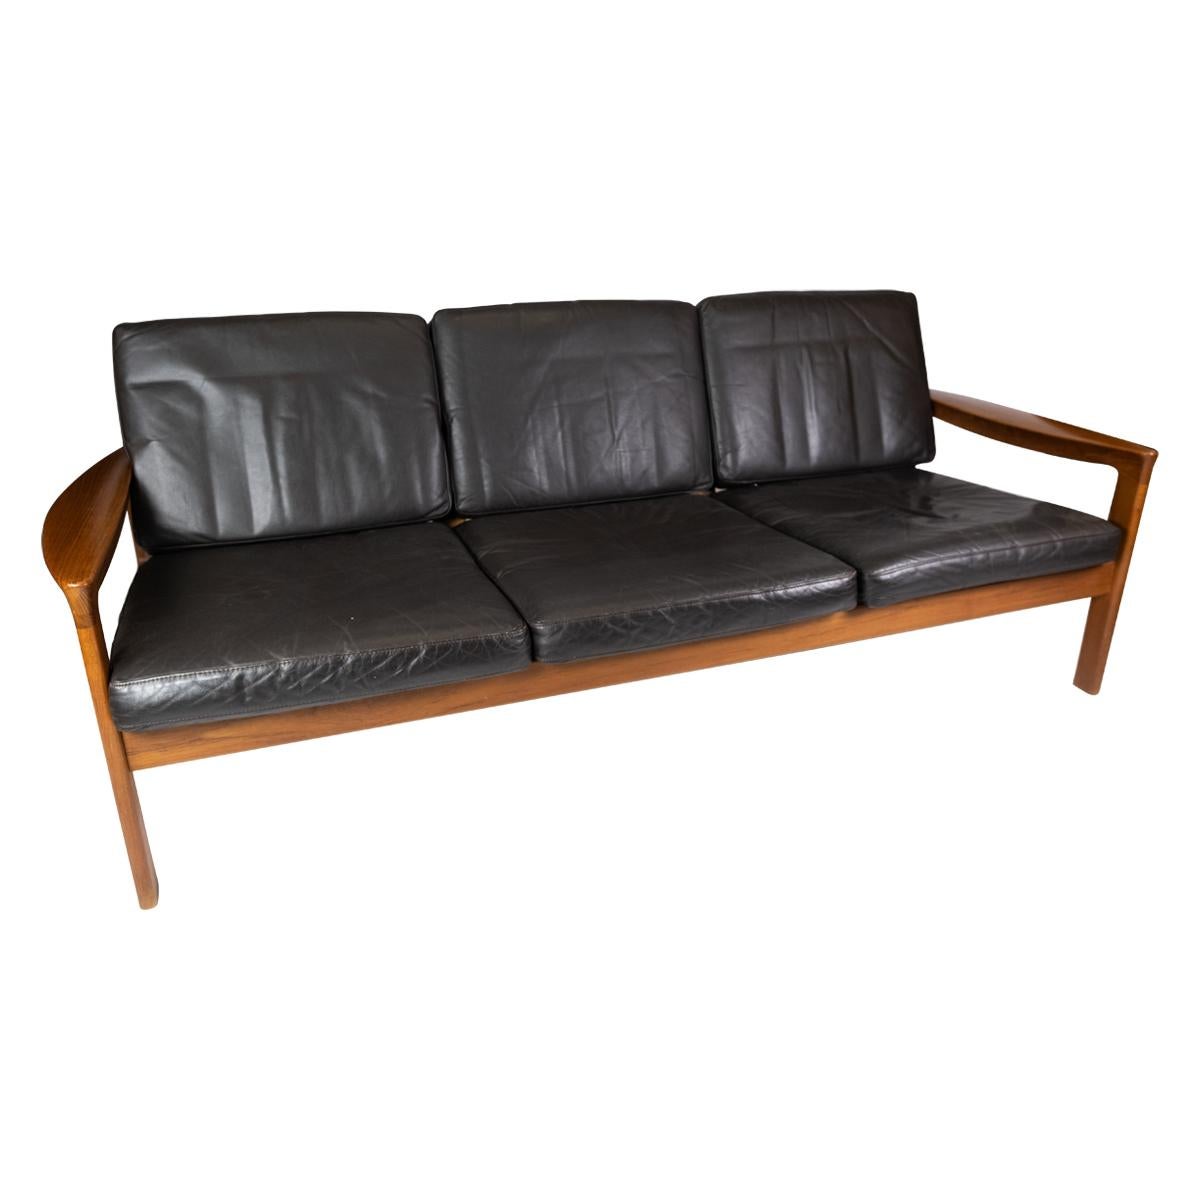 Mid-Century Modern Three Seater Sofa in Teak with Black Leather by Arne Vodder